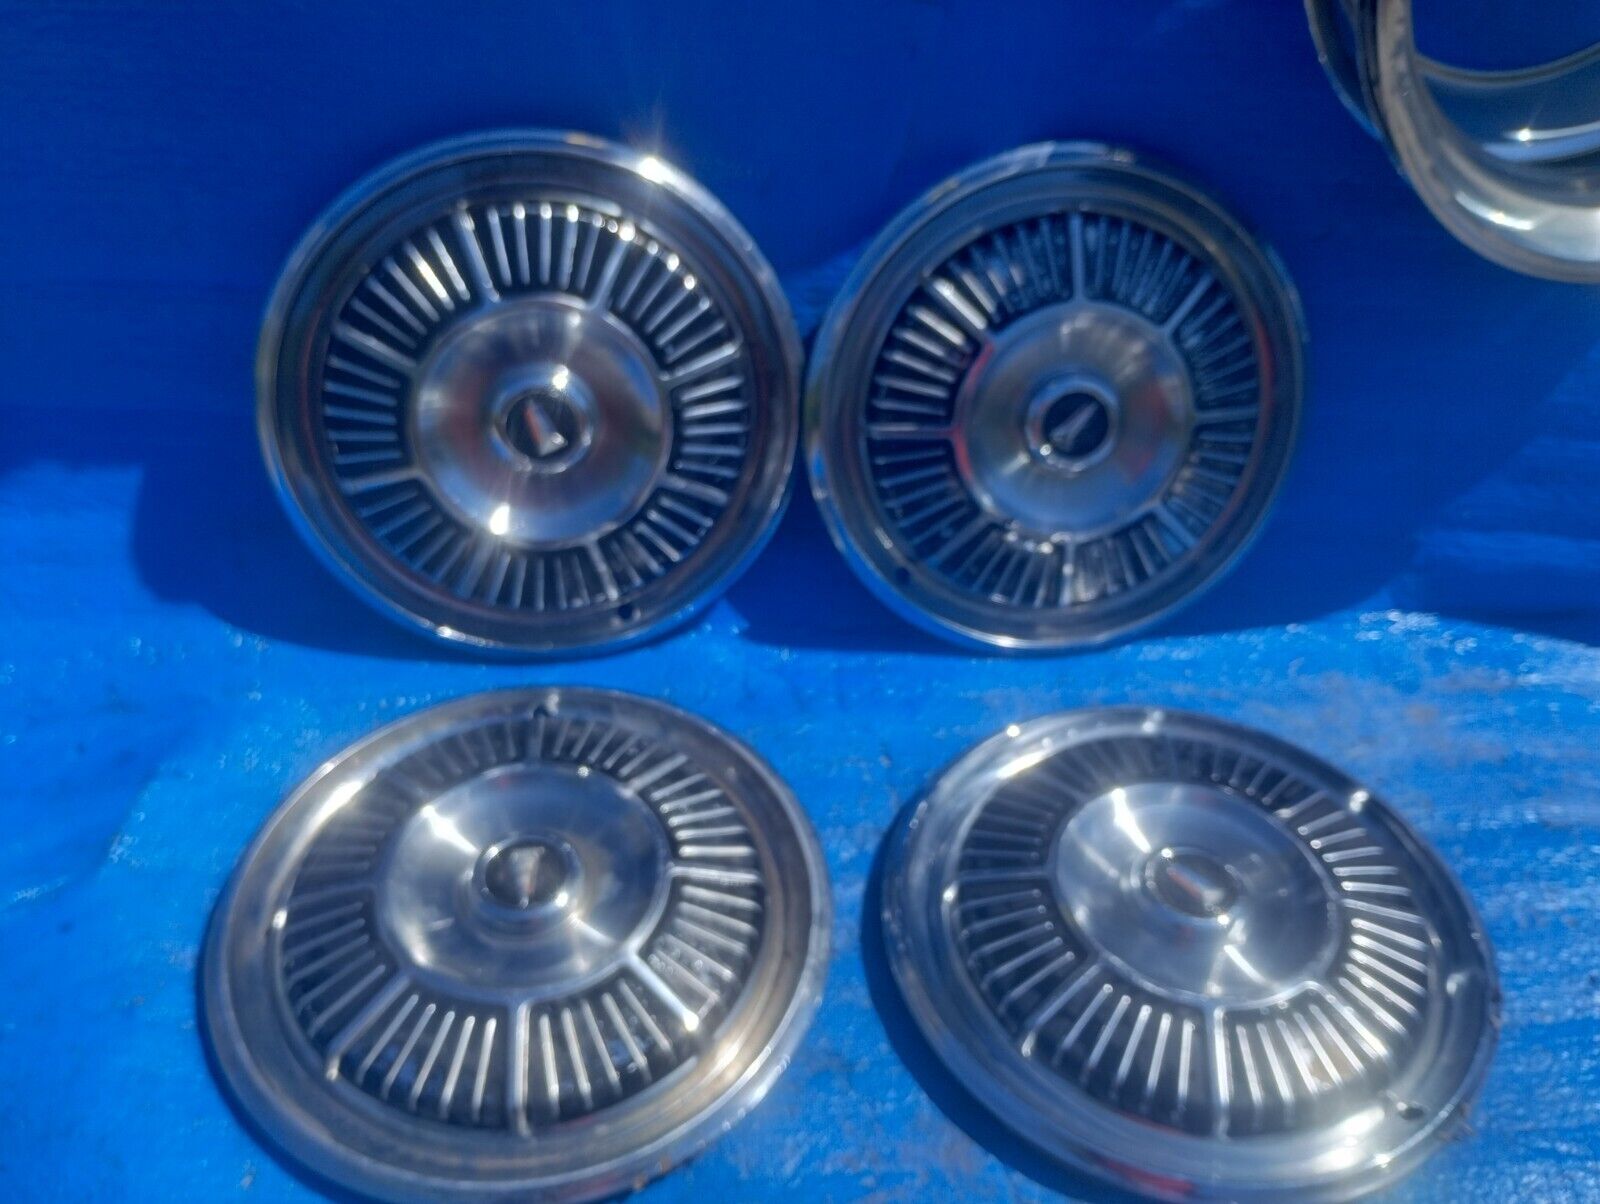  1965 Plymouth Fury 14 inch hubcaps wheel covers Set